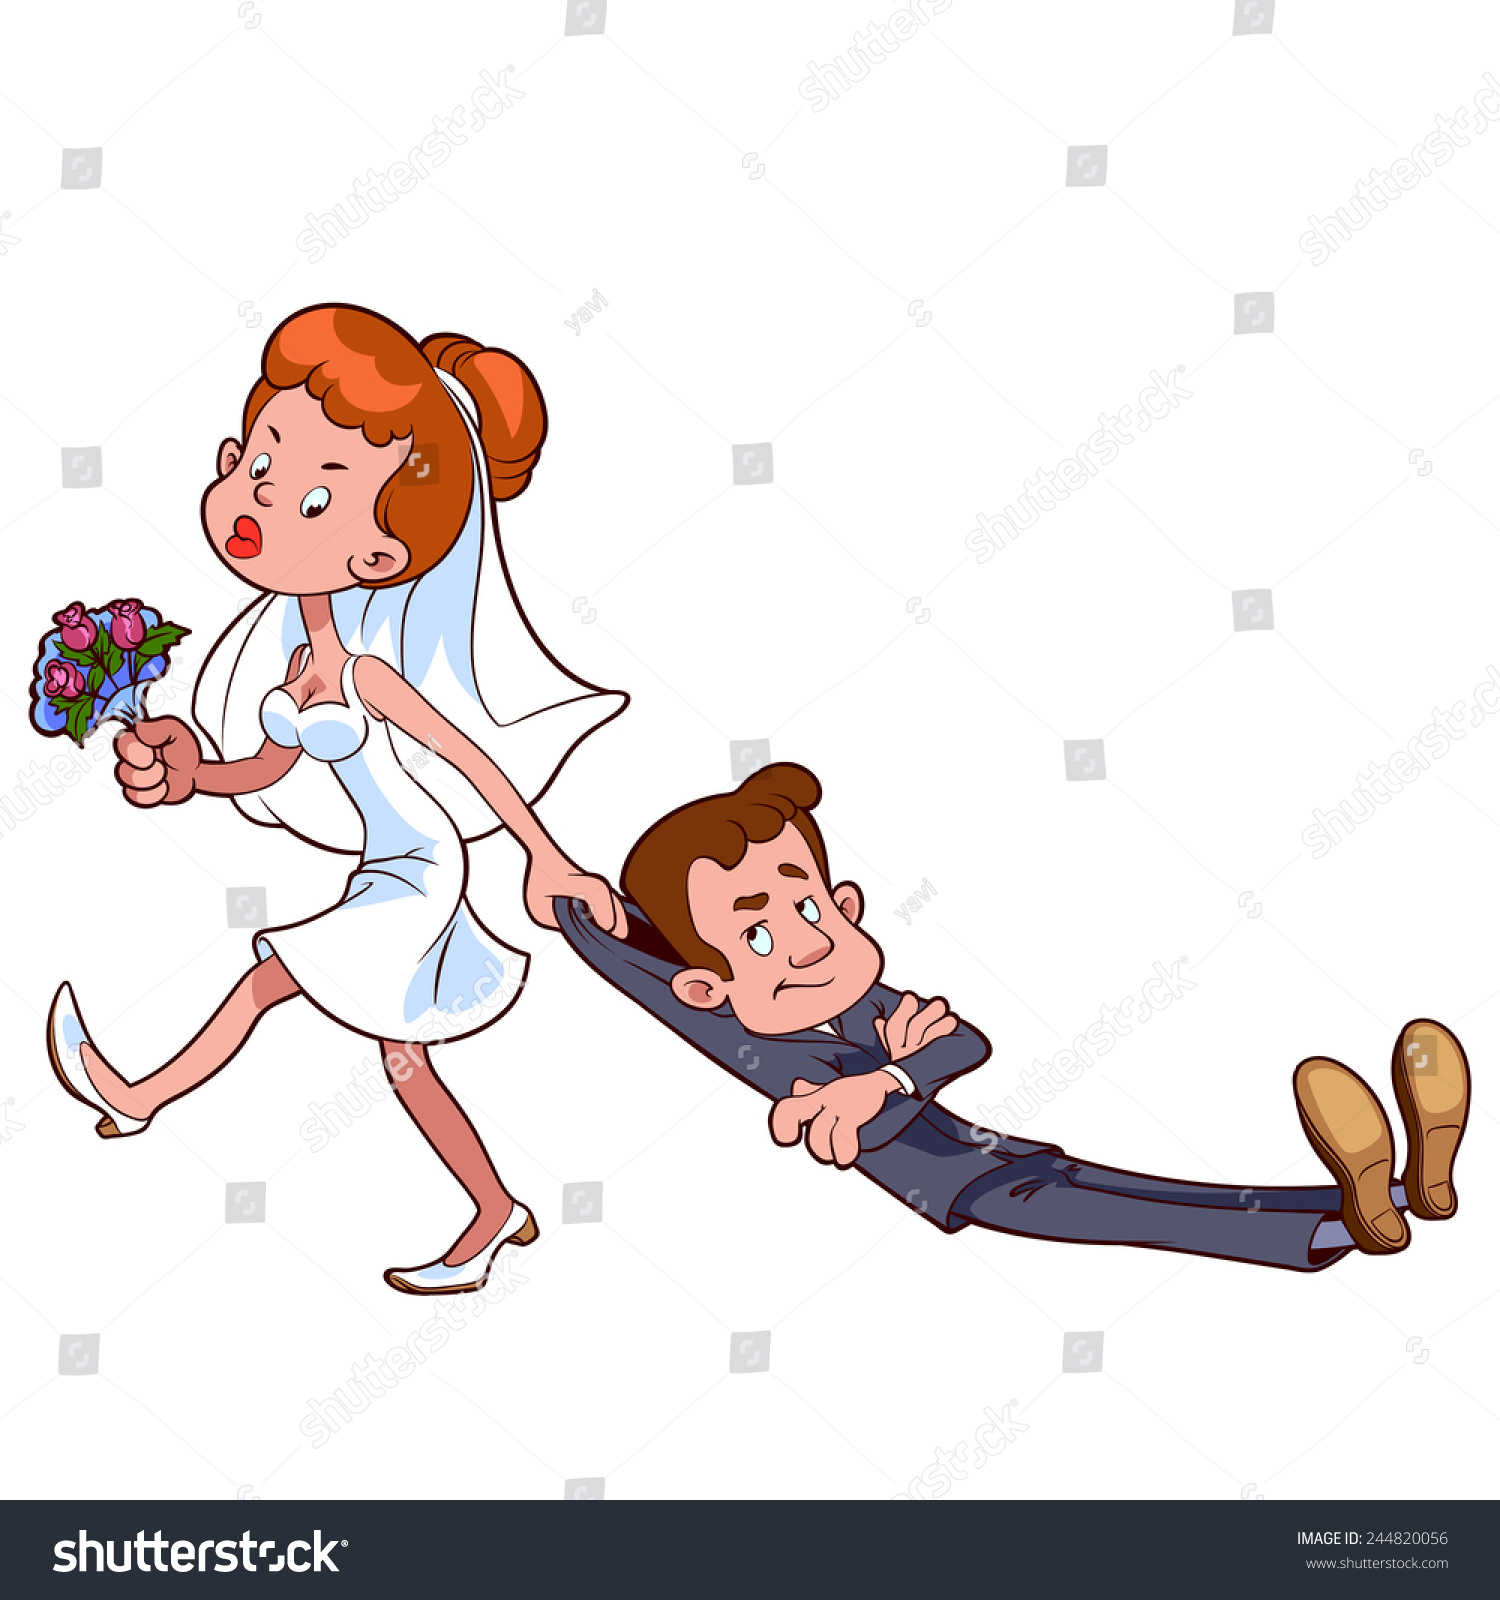 funny wedding clipart bride and groom - photo #44